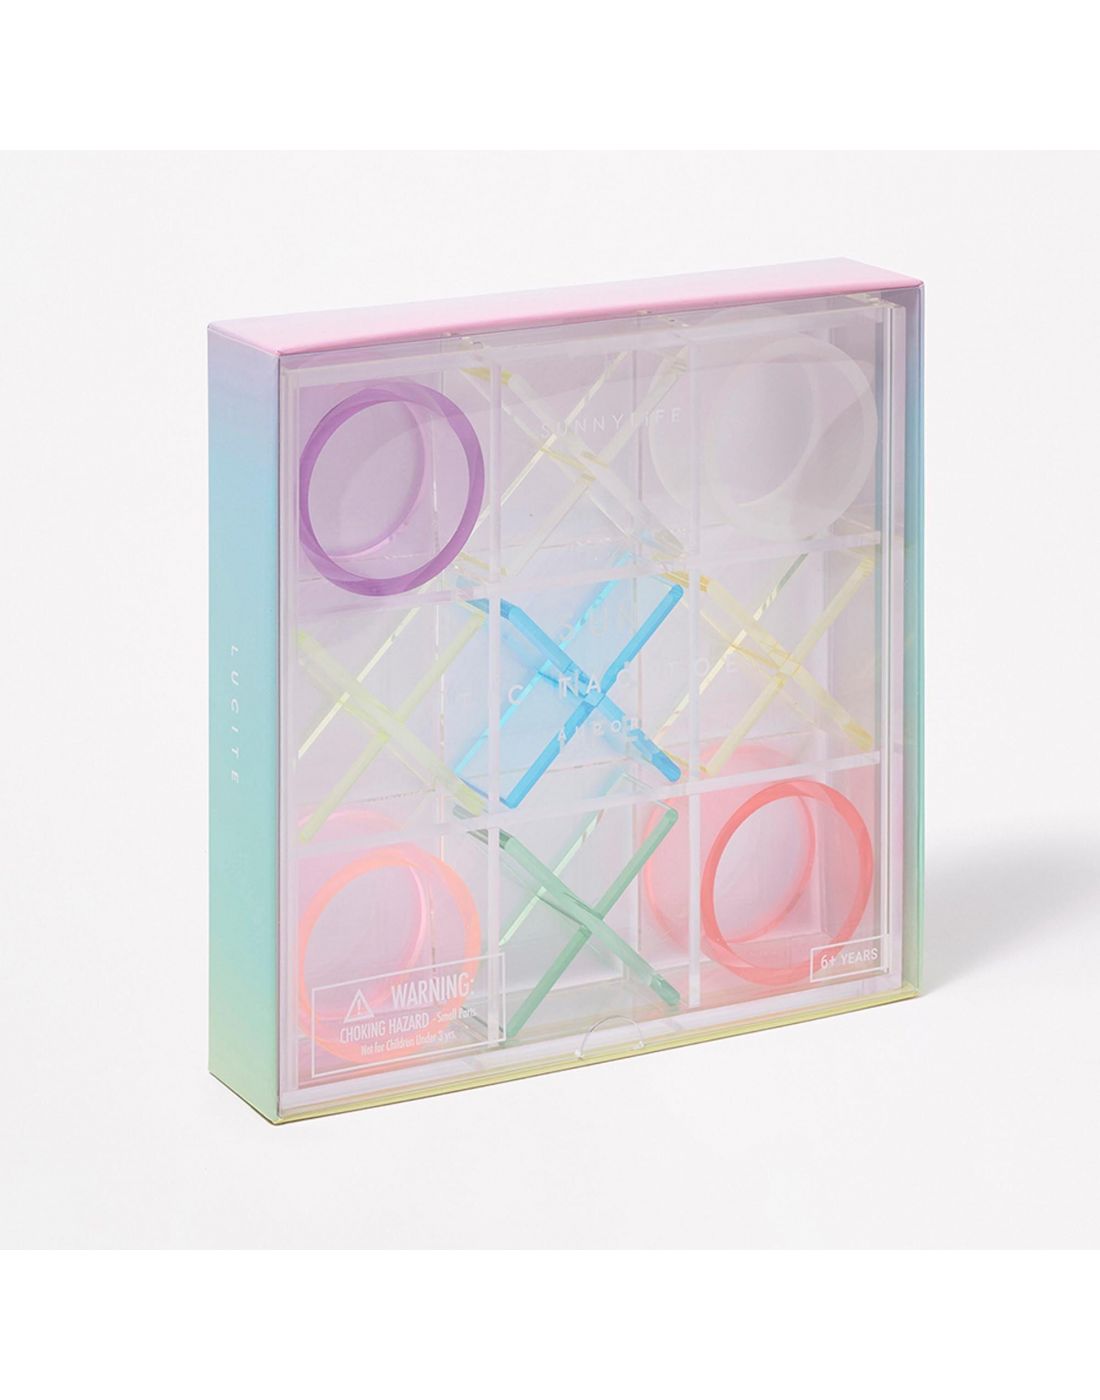 Sunny Life Lucite Tic Tac Toe
 Smiley